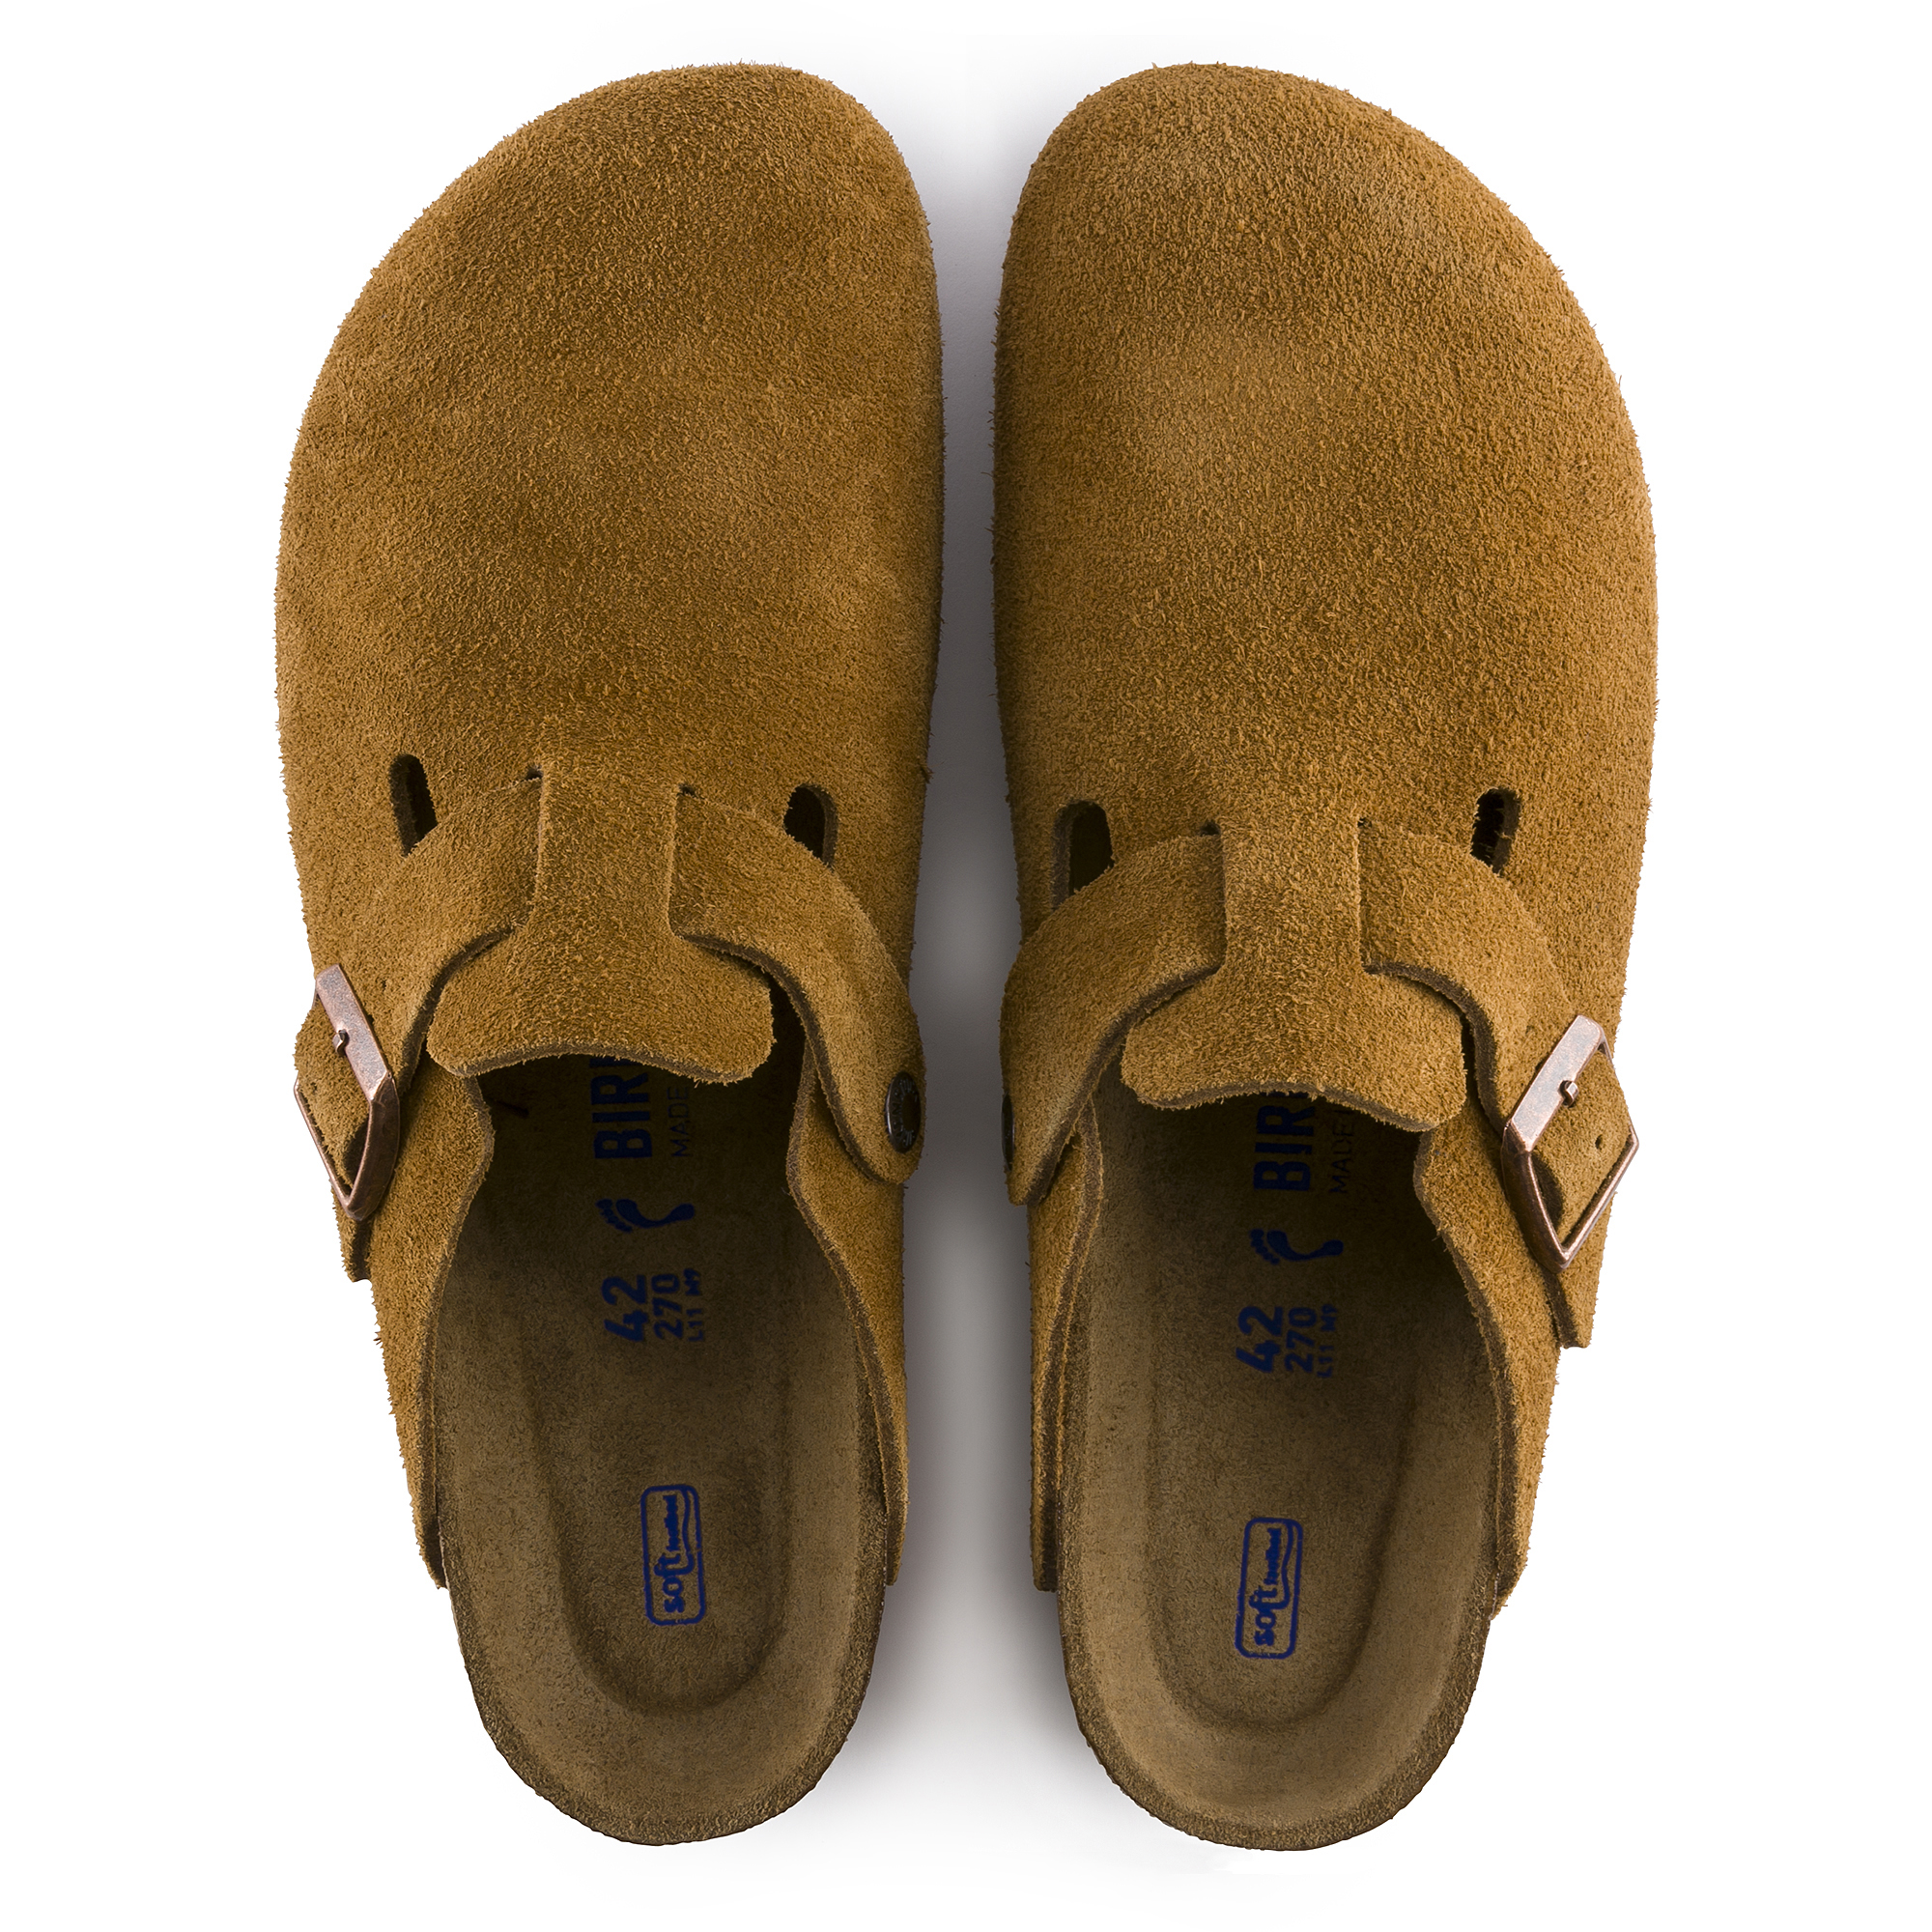 Boston Soft Footbed Suede Leather Mink